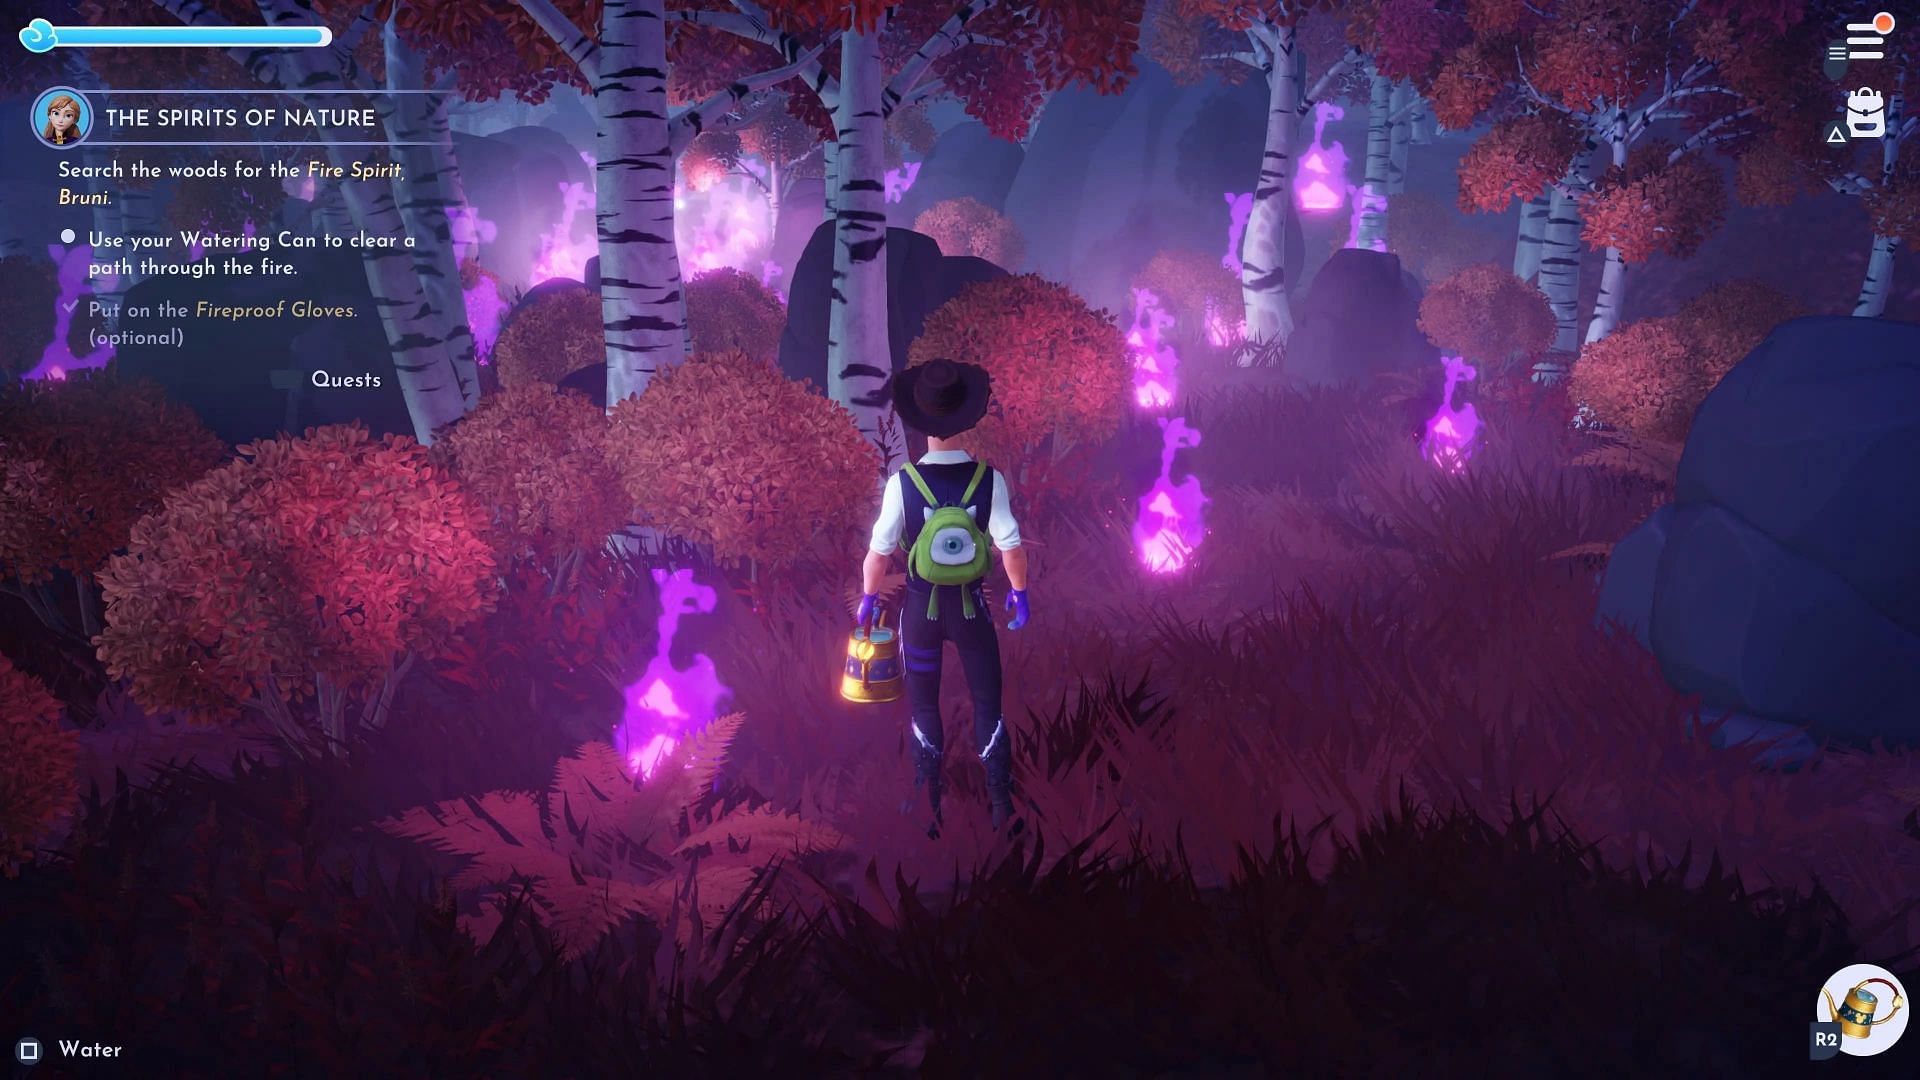 The Spirts of Nature is the first Disney Dreamlight Valley quest associated with Anna (Image via Gameloft)